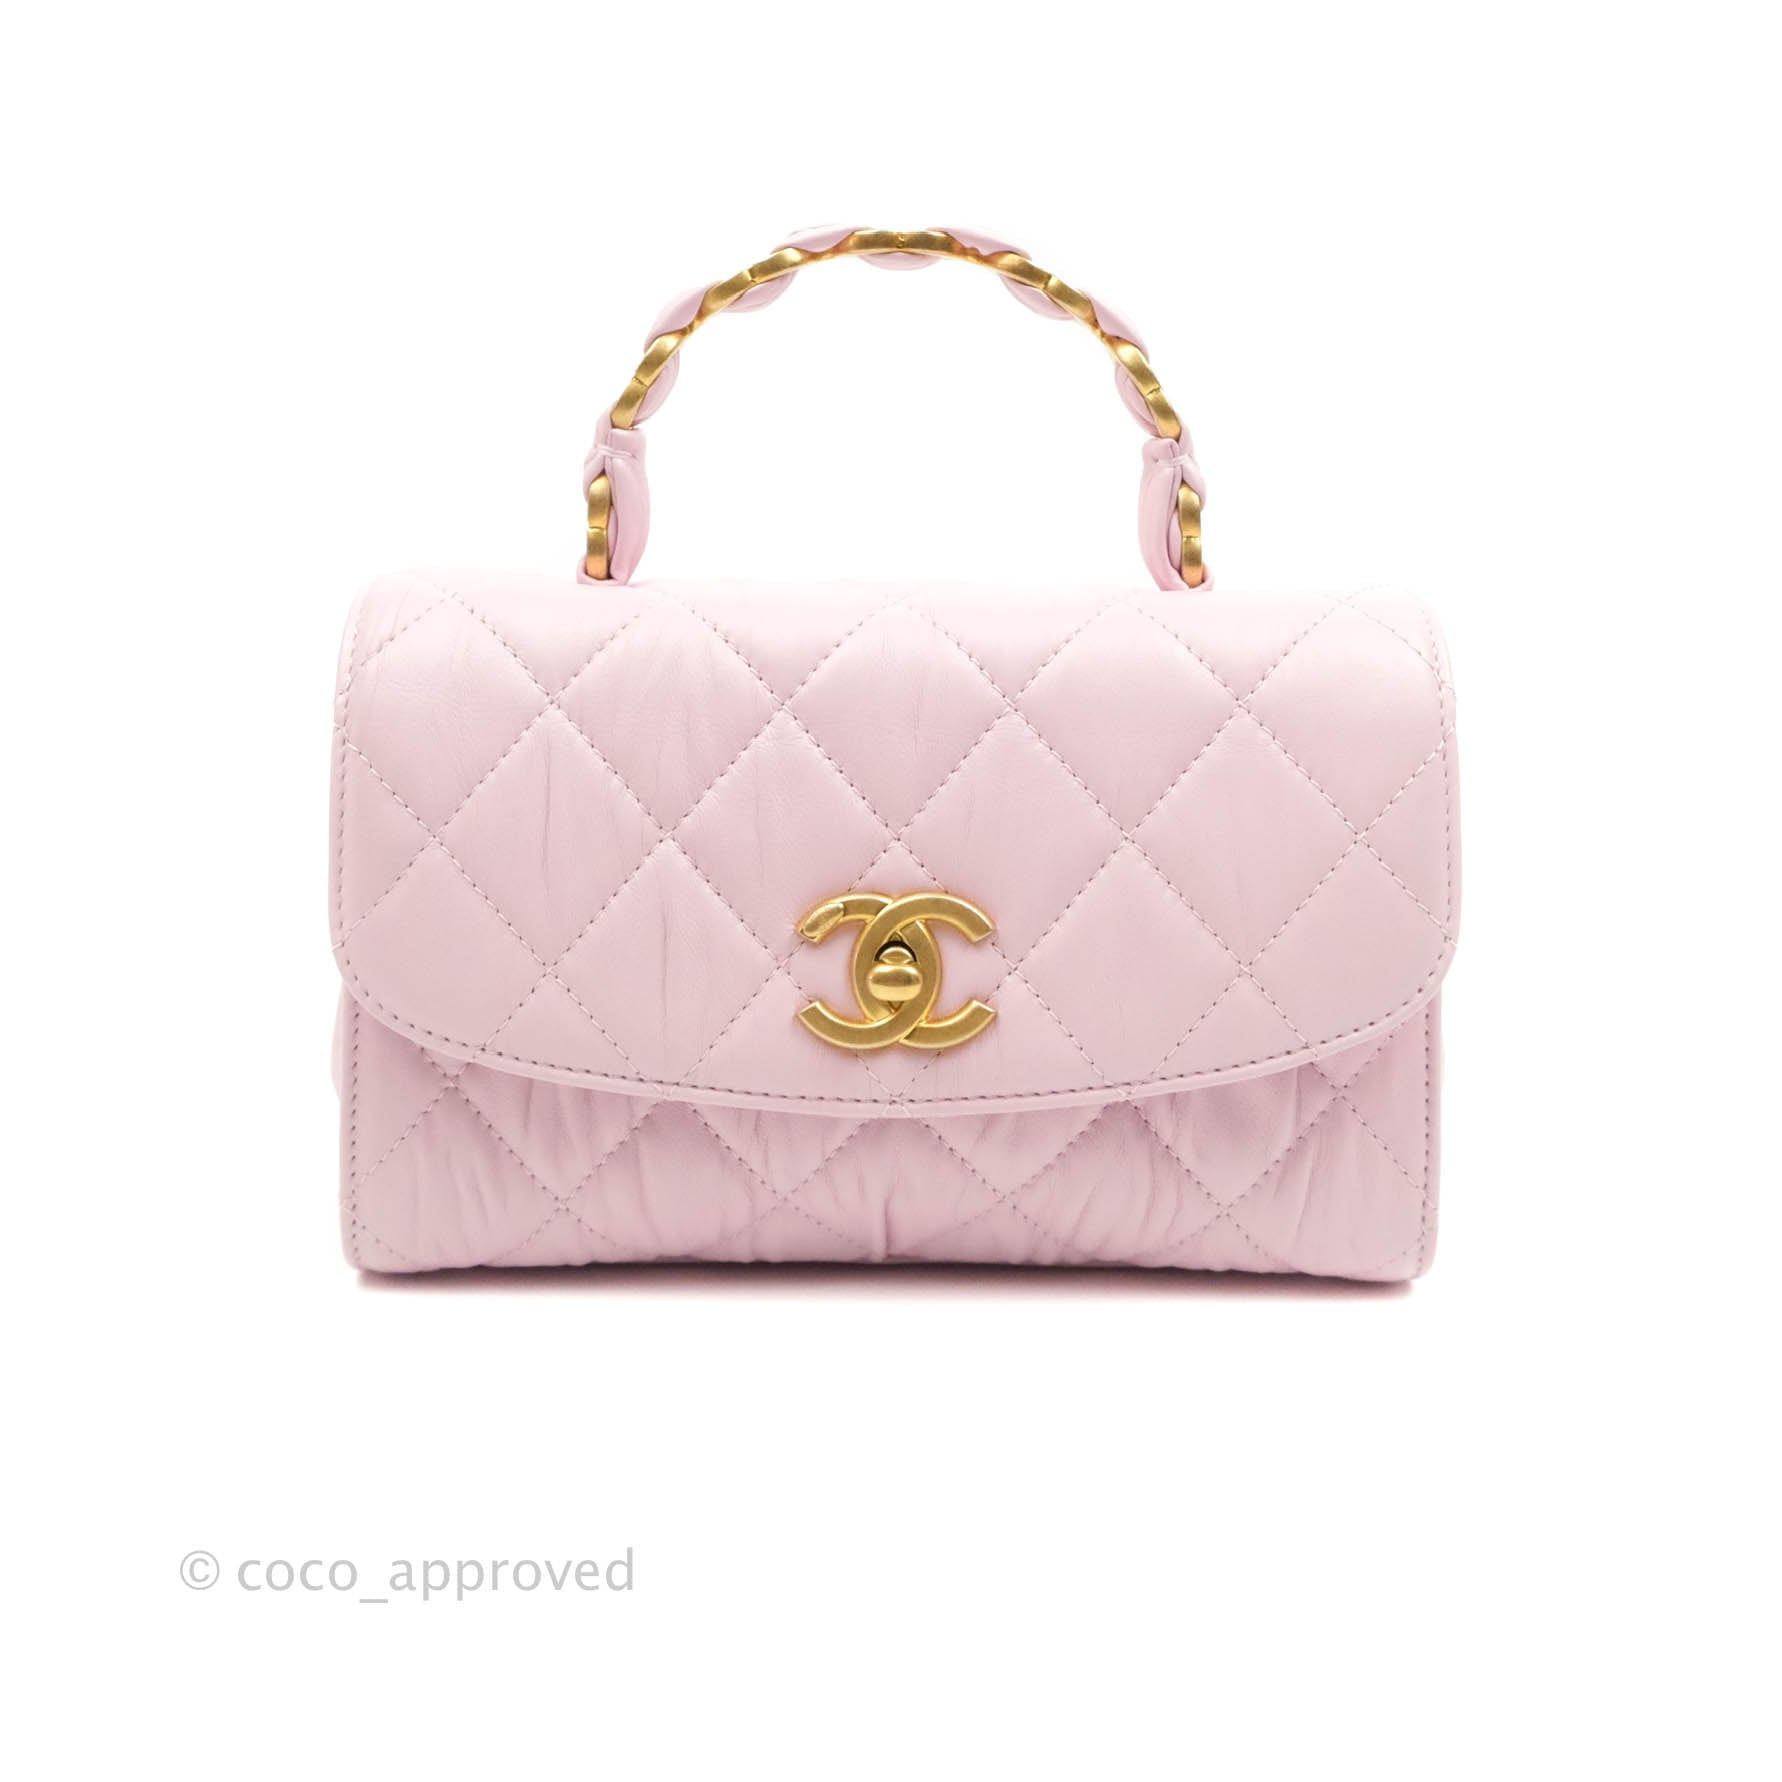 Sothebys Specialists Picks Pink Chanel Bag  Handbags and Accessories   Sothebys